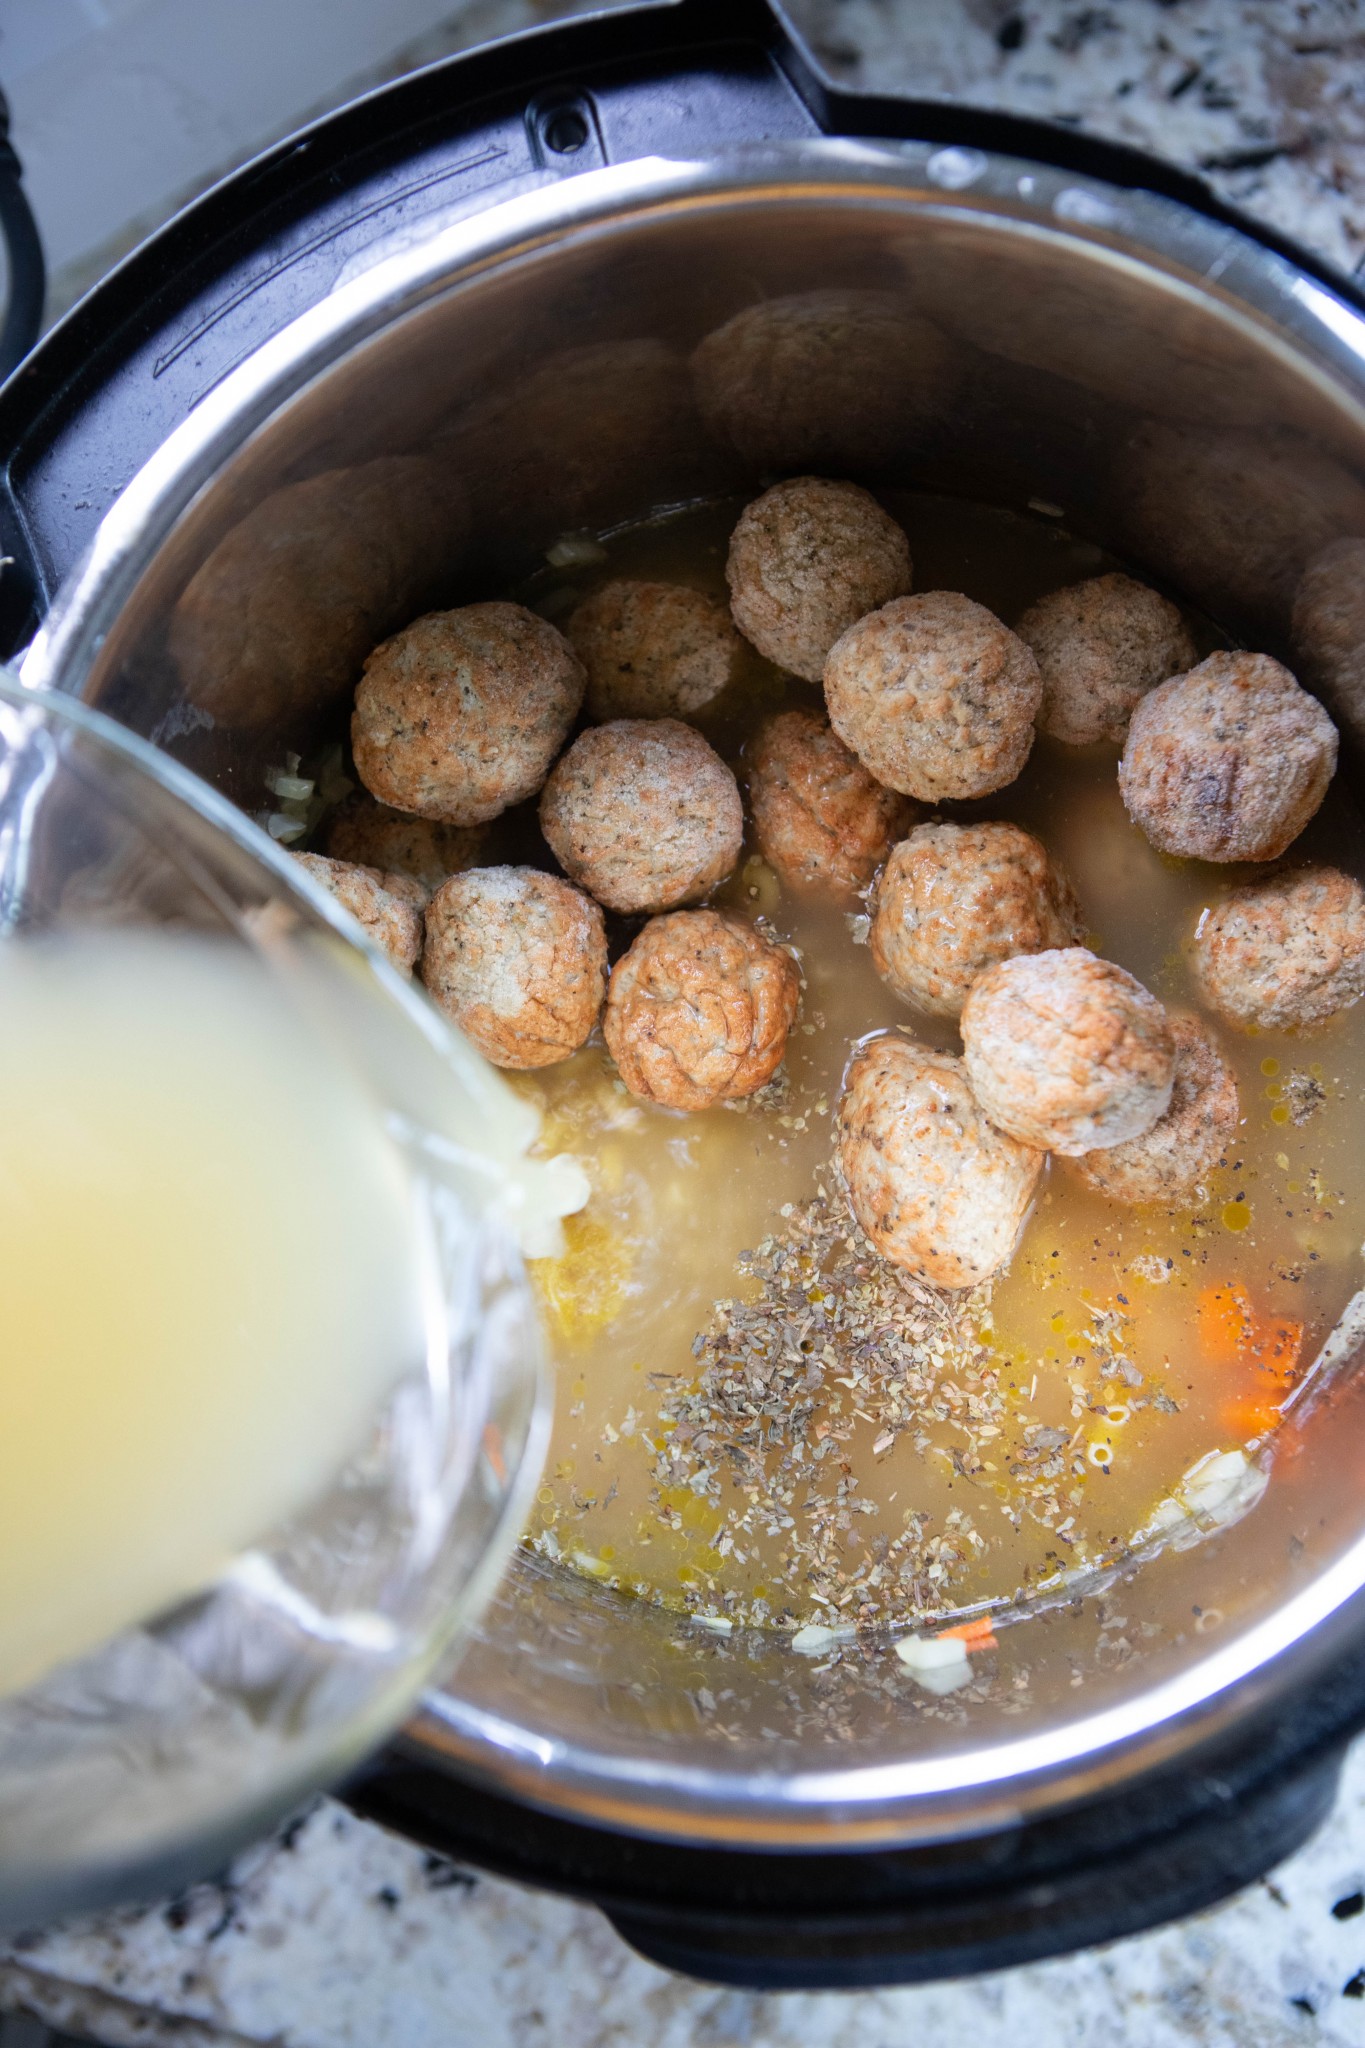 broth being poured over meatballs in an Instant Pot